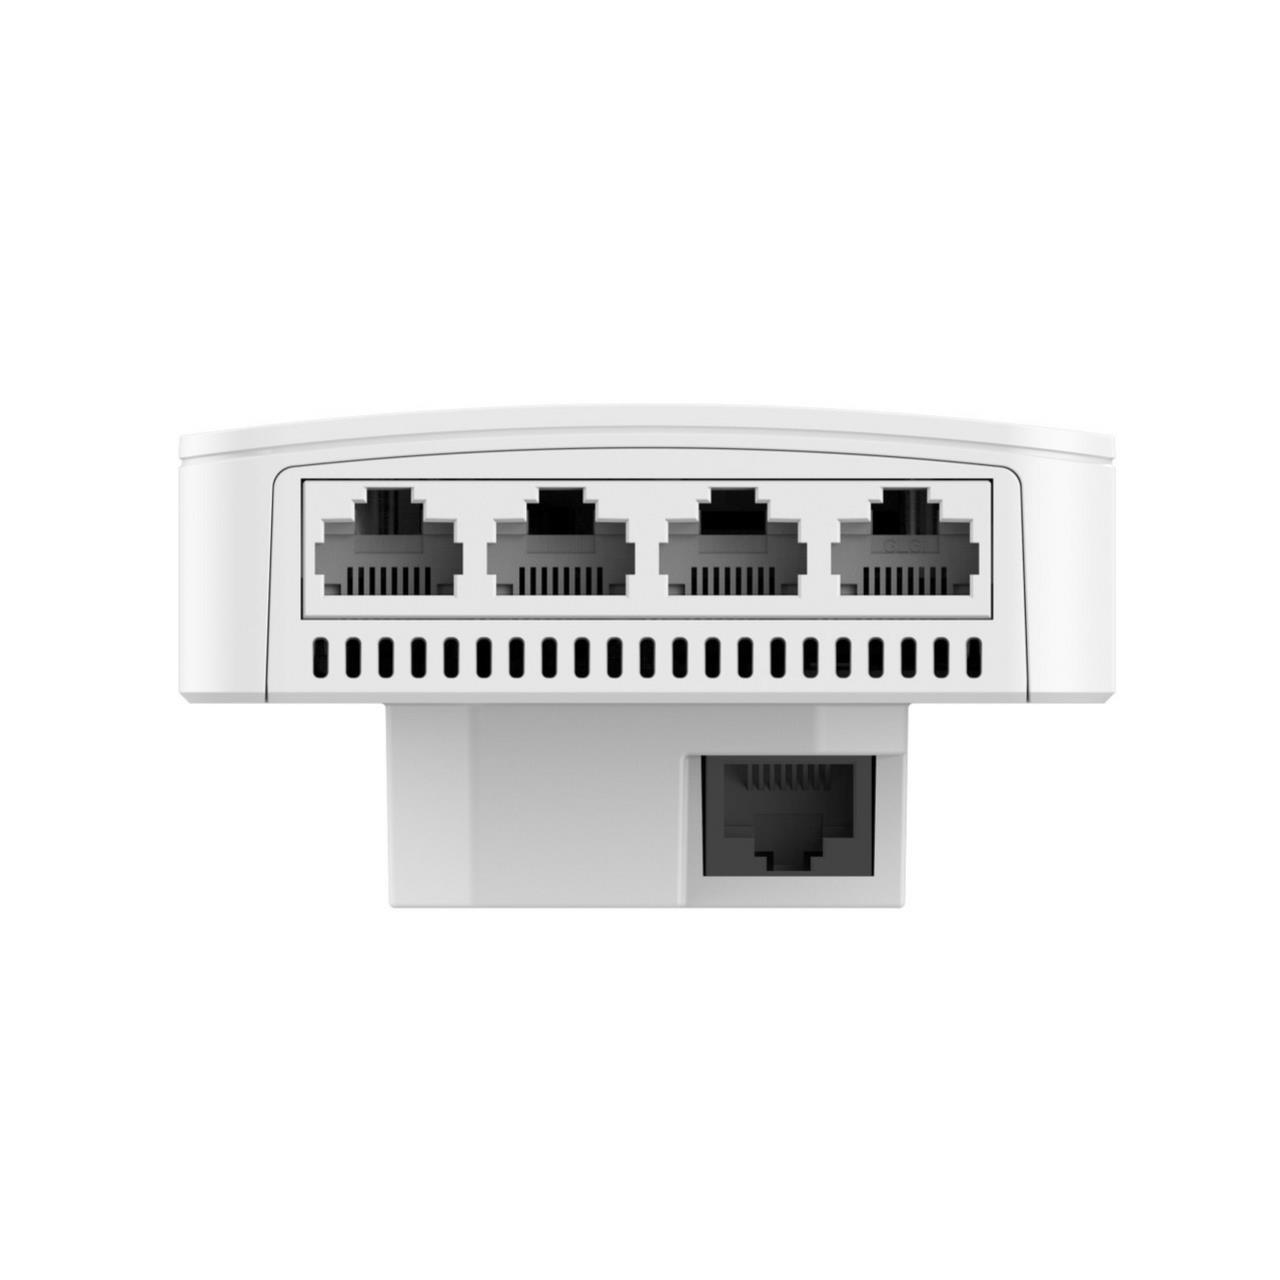 Reyee Wi-Fi 5 Access Point, Wandmontage, 1267 Mbps, 5x Gbit, PoE-Out